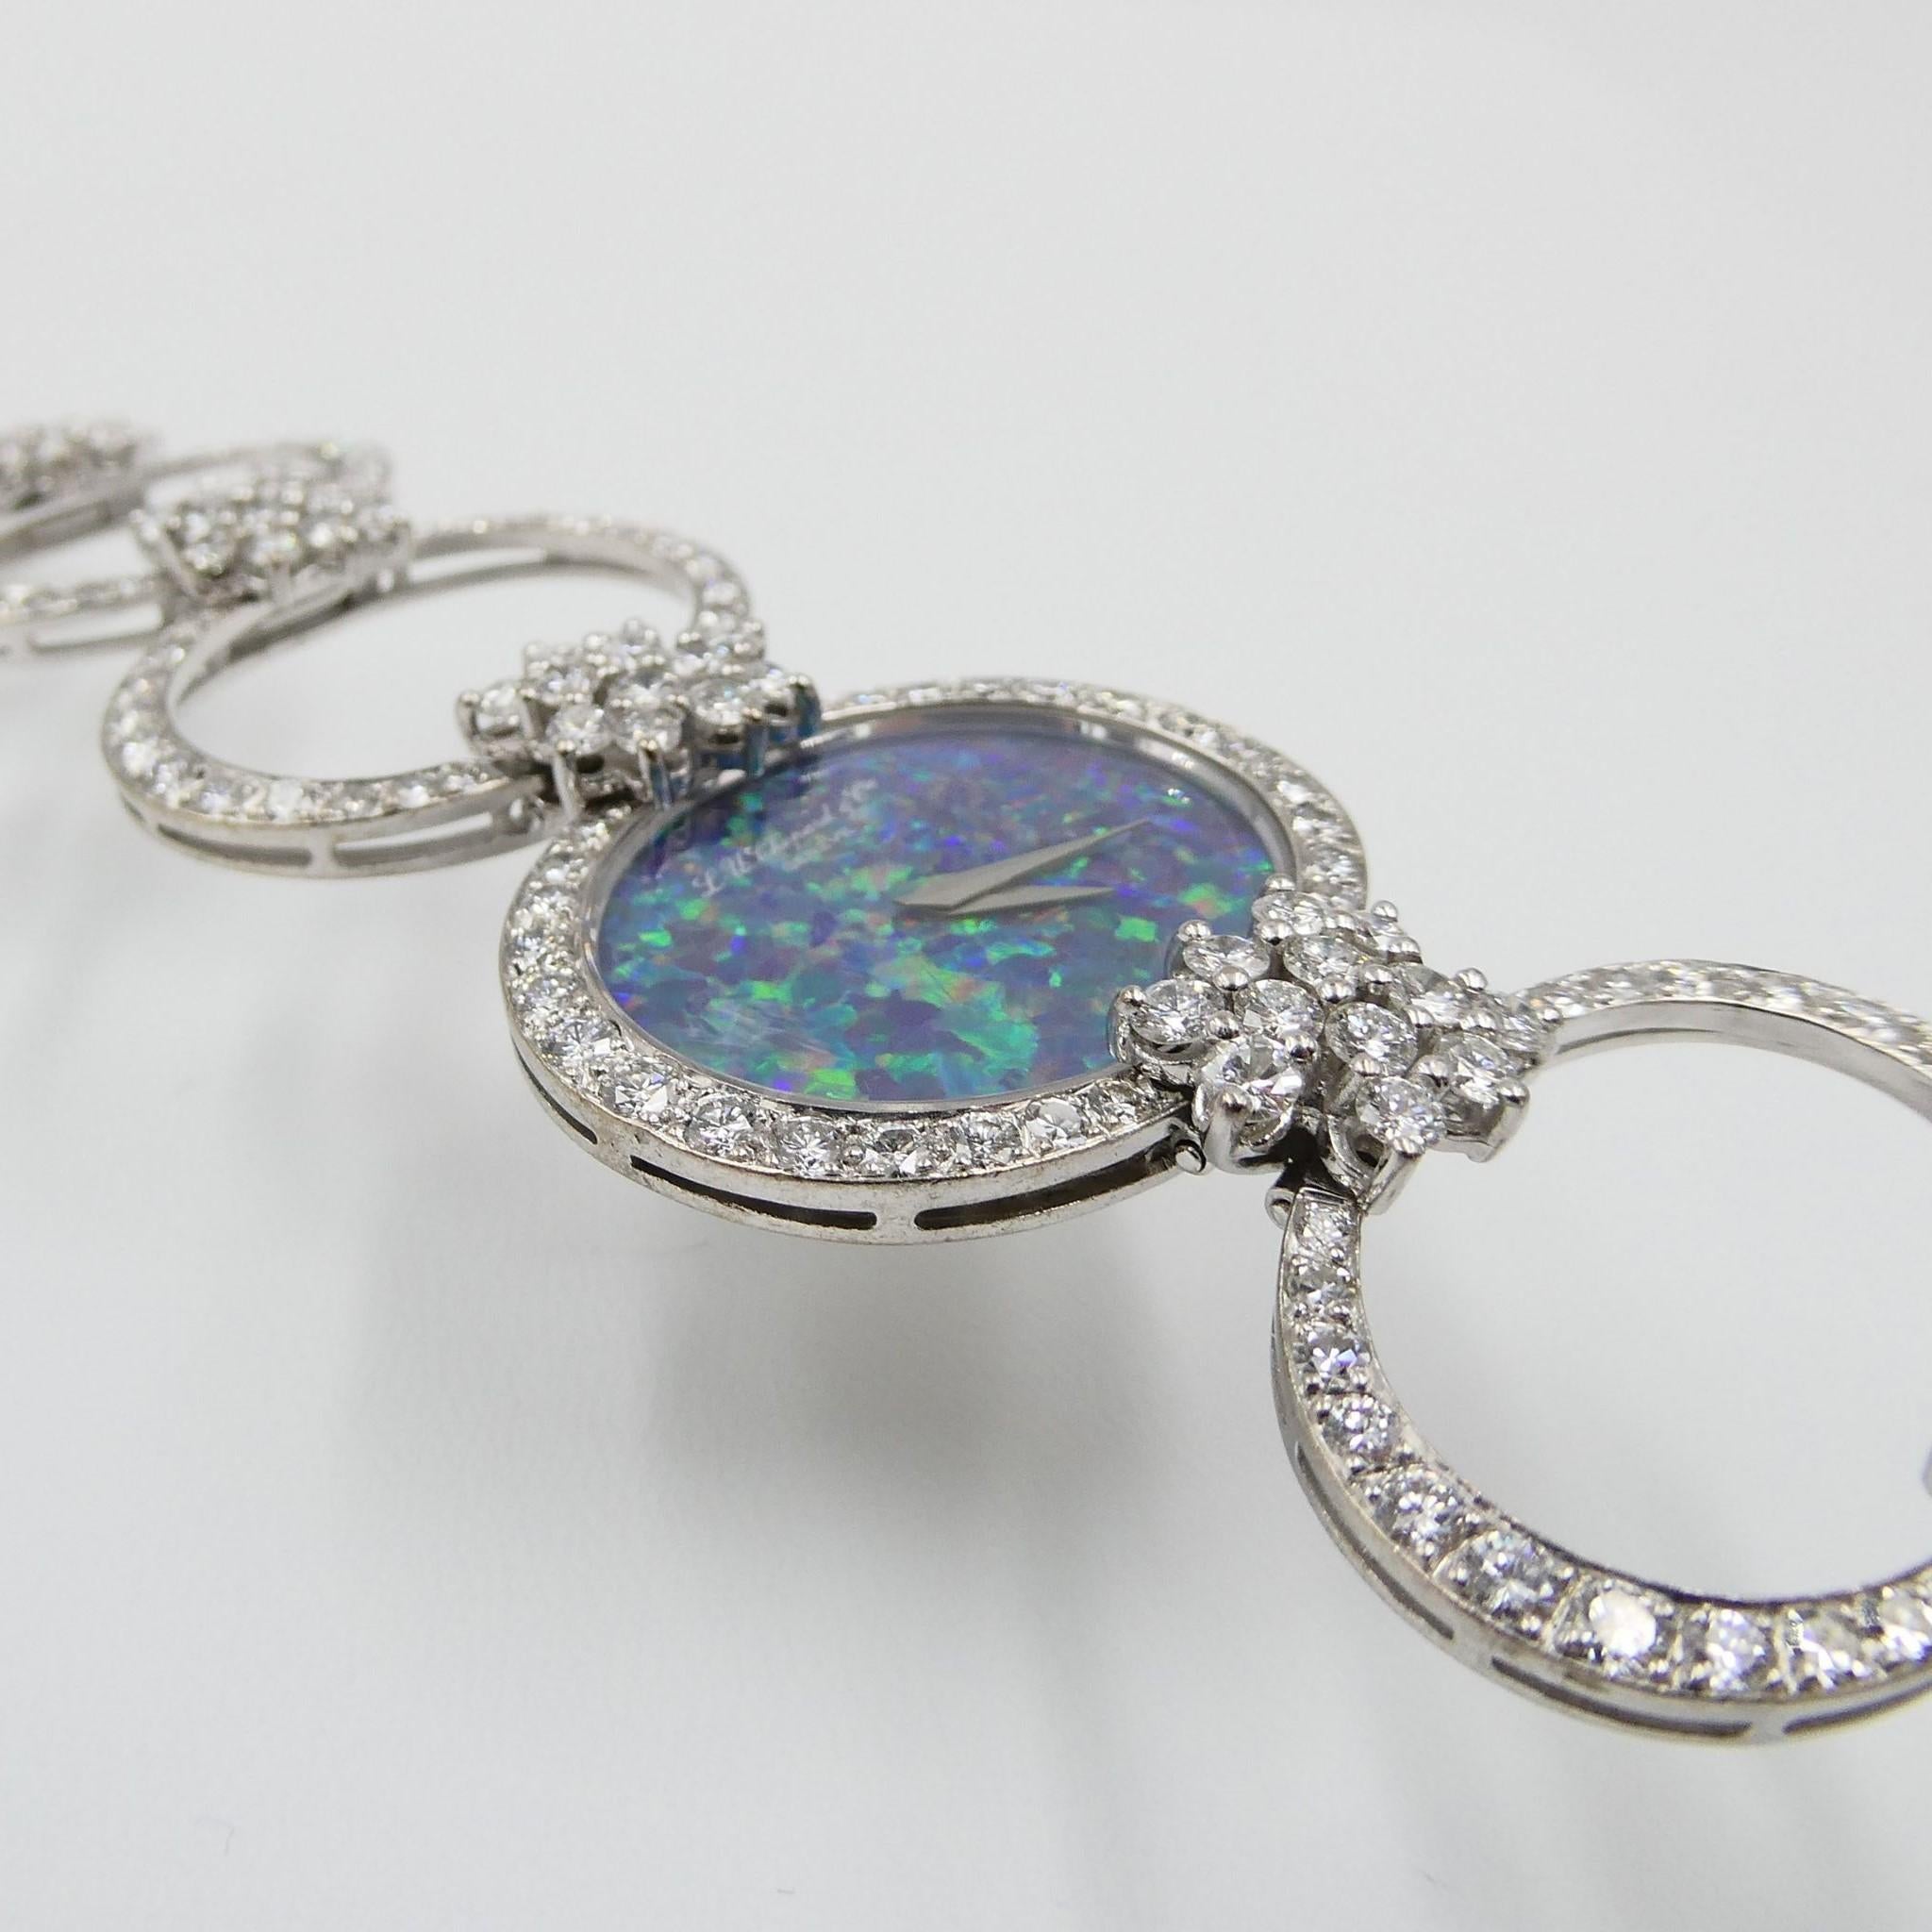 Women's or Men's Chopard Watch with Black Opal and Diamond in 18 Karat White Gold